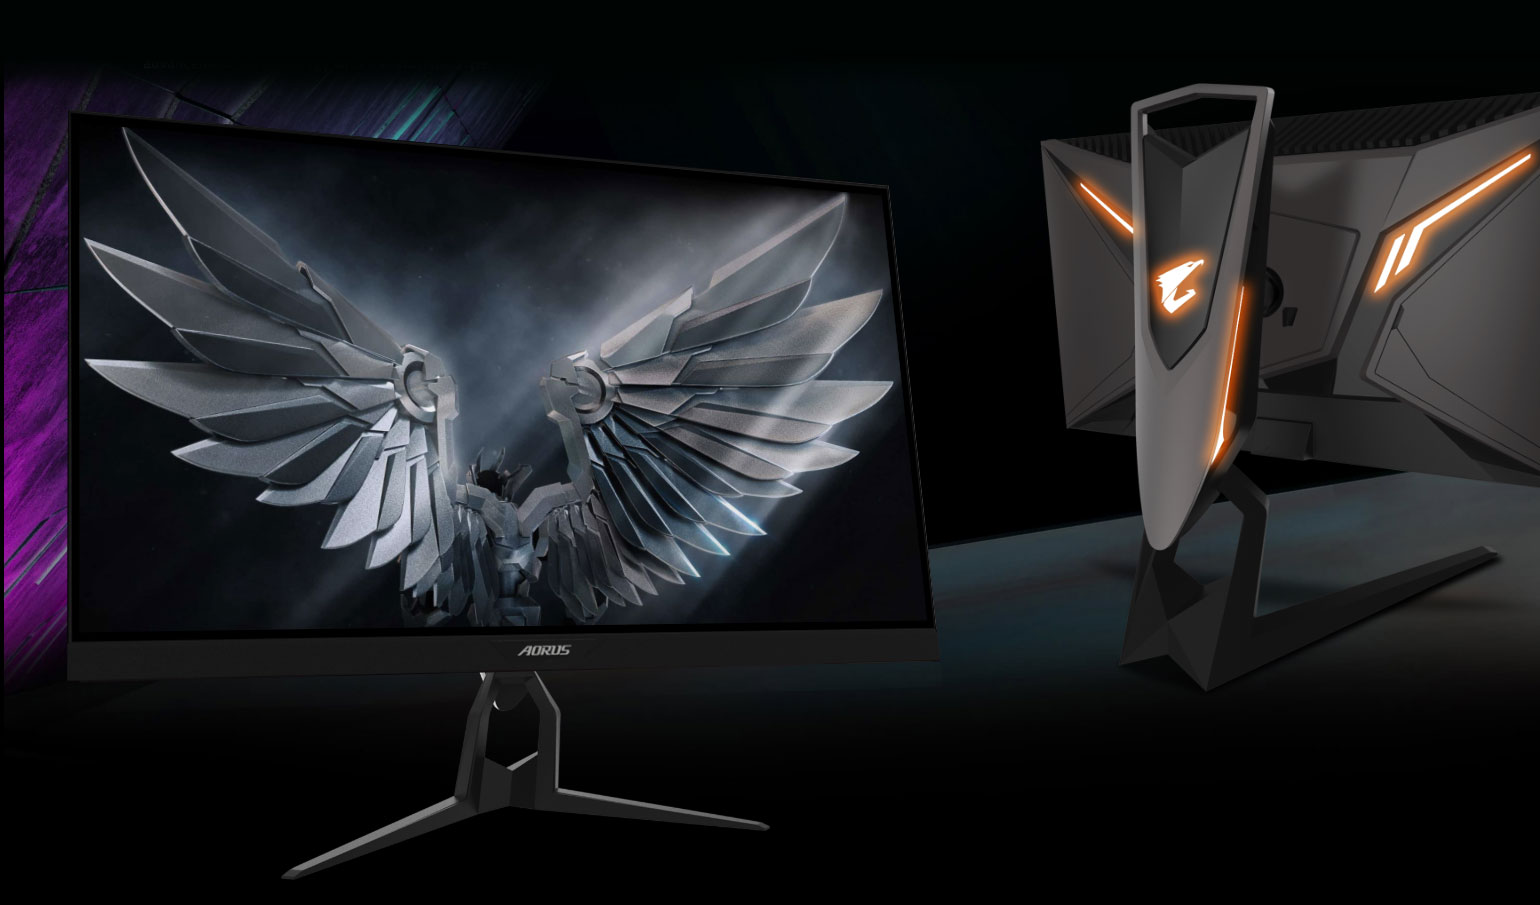 two monitors , one is facing front and the other is showing back of the GIGABYTE AORUS Monitor